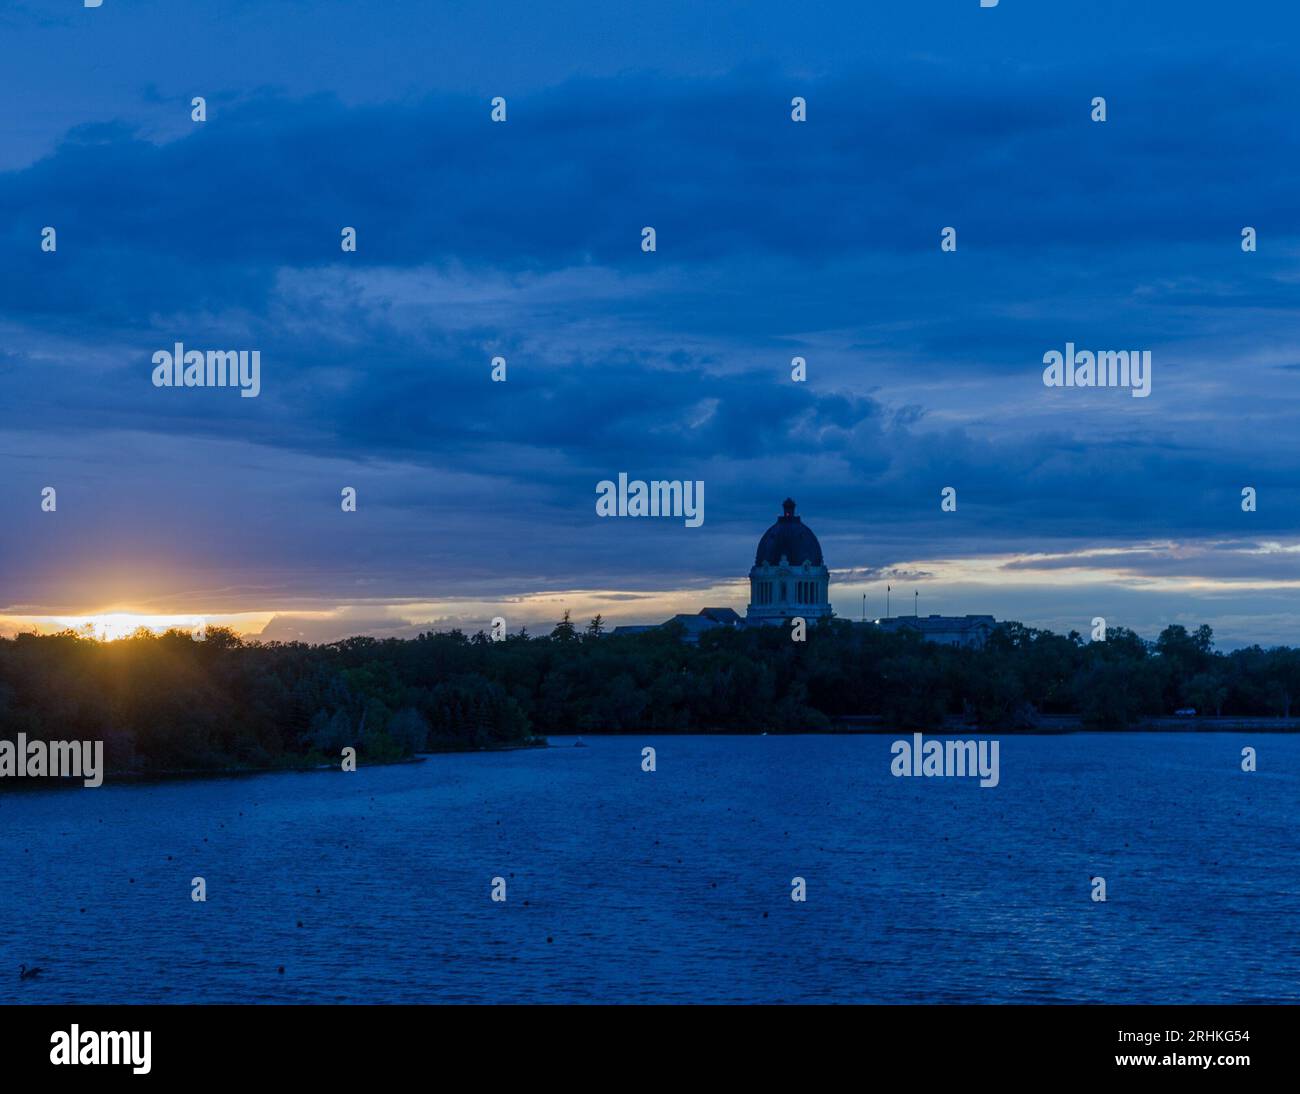 The dome of the Saskatchewan provincial legislative building can be seen with a backdrop of a prairie sunset. Wascana Lake is in the foreground. Stock Photo